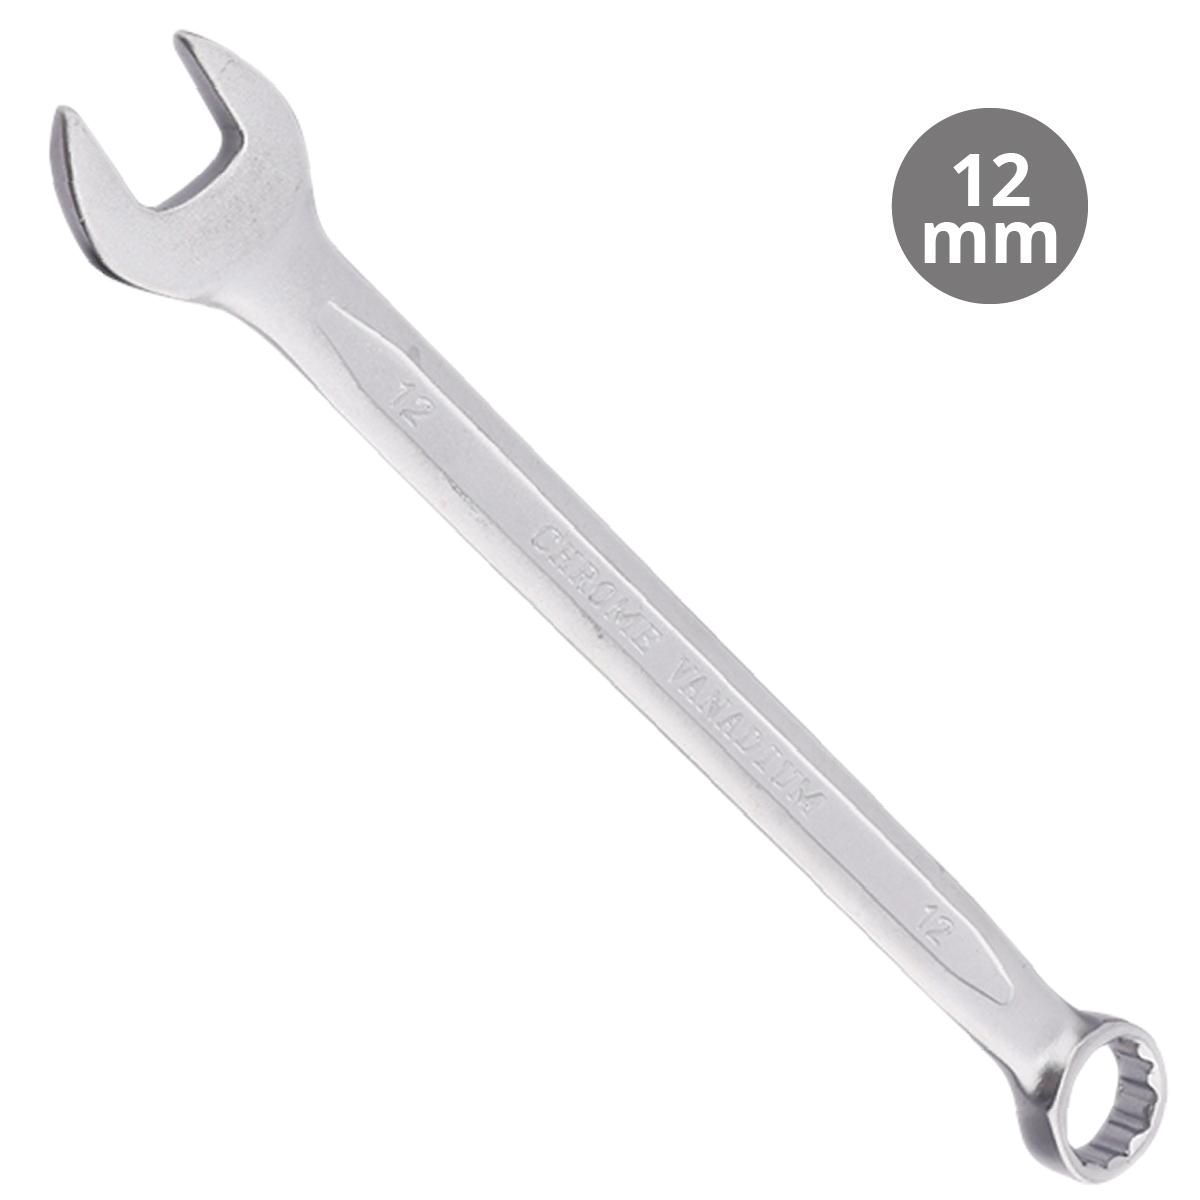 Combination wrench CR-V 12mm